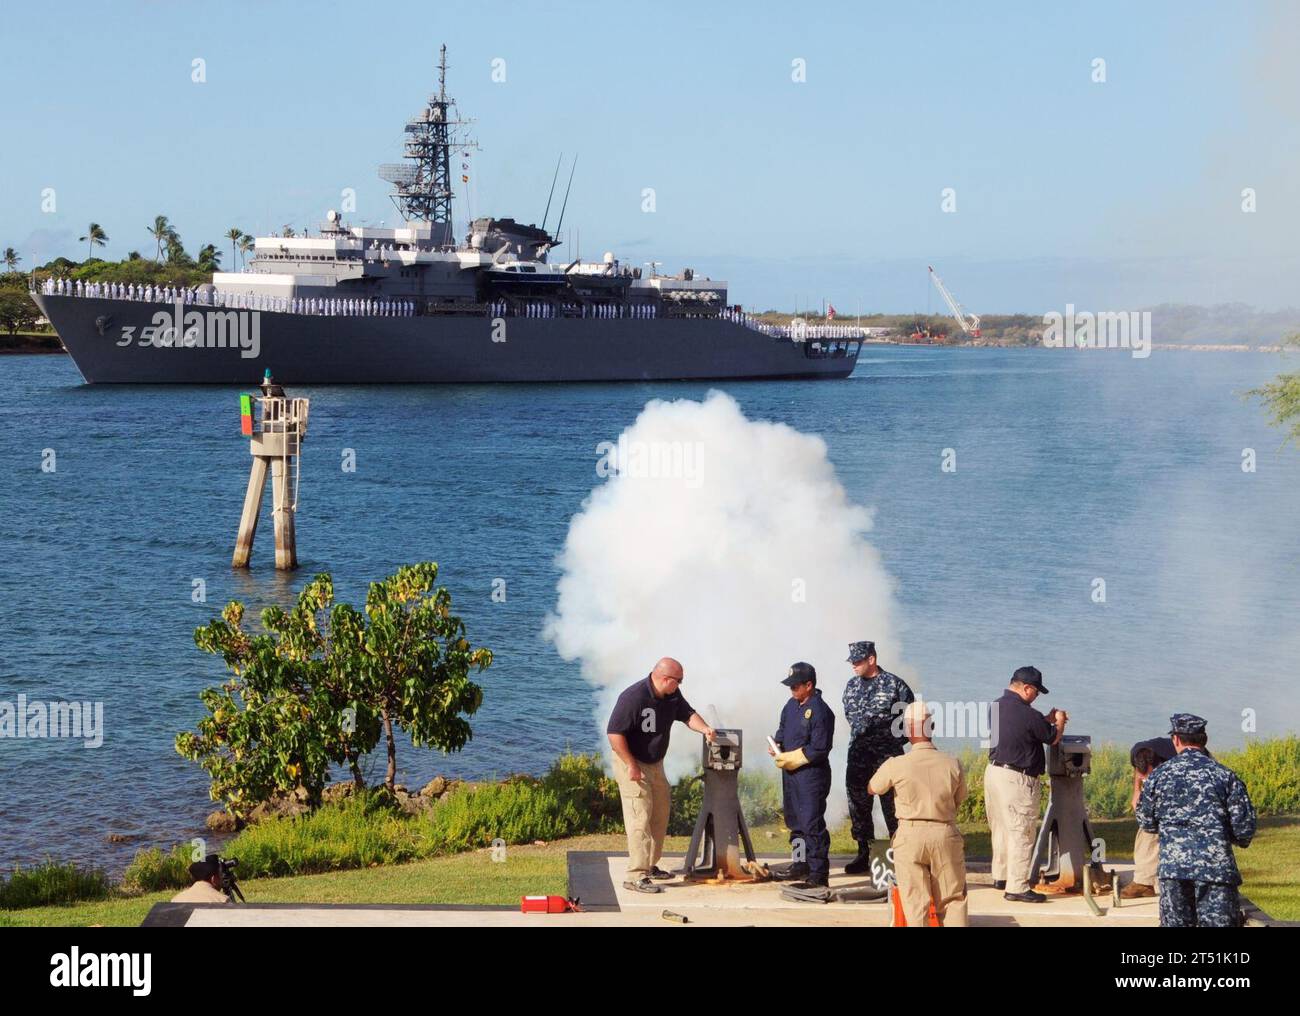 1006080464S-005 PEARL HARBOR (June 8, 2010) Members of Lockheed Martin and Joint Base Pearl Harbor-Hickam Security Department perform a 21-gun salute for the arrival of the Japan Maritime Self-Defense Force training squadron ship JS Kashima (TV 3508) for a port visit. This year marks the 50th anniversary of the U.S. and Japan Treaty of Mutual Cooperation of Security that in 1960 established the alliance between the two countries. (U.S. Navy Stock Photo